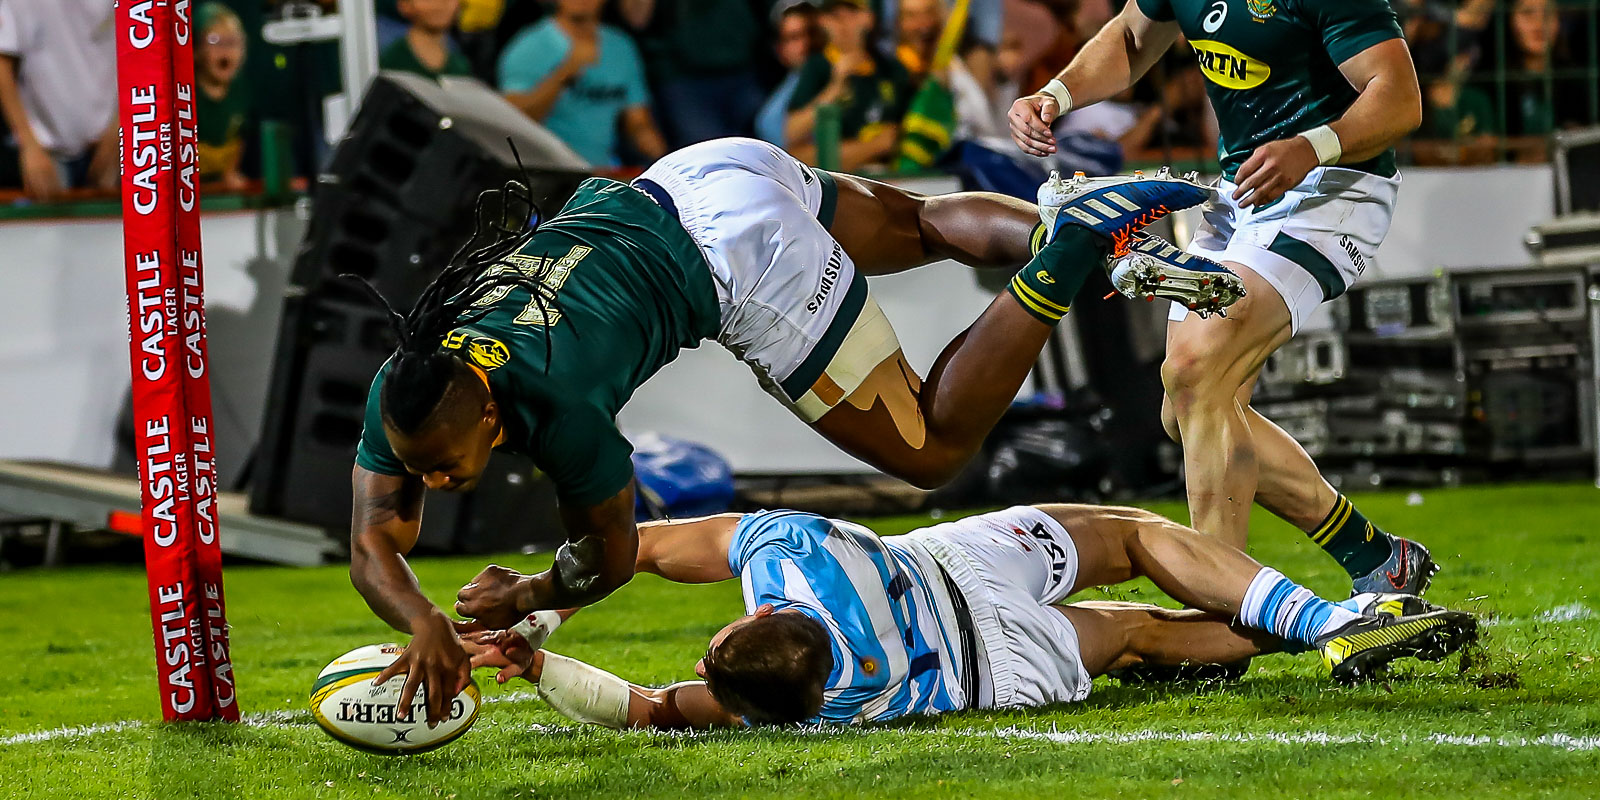 Sbu Nkosi goes over for a try the last time the Springboks played in front of crowds in South Africa, against Argentina in Pretoria in 2019.